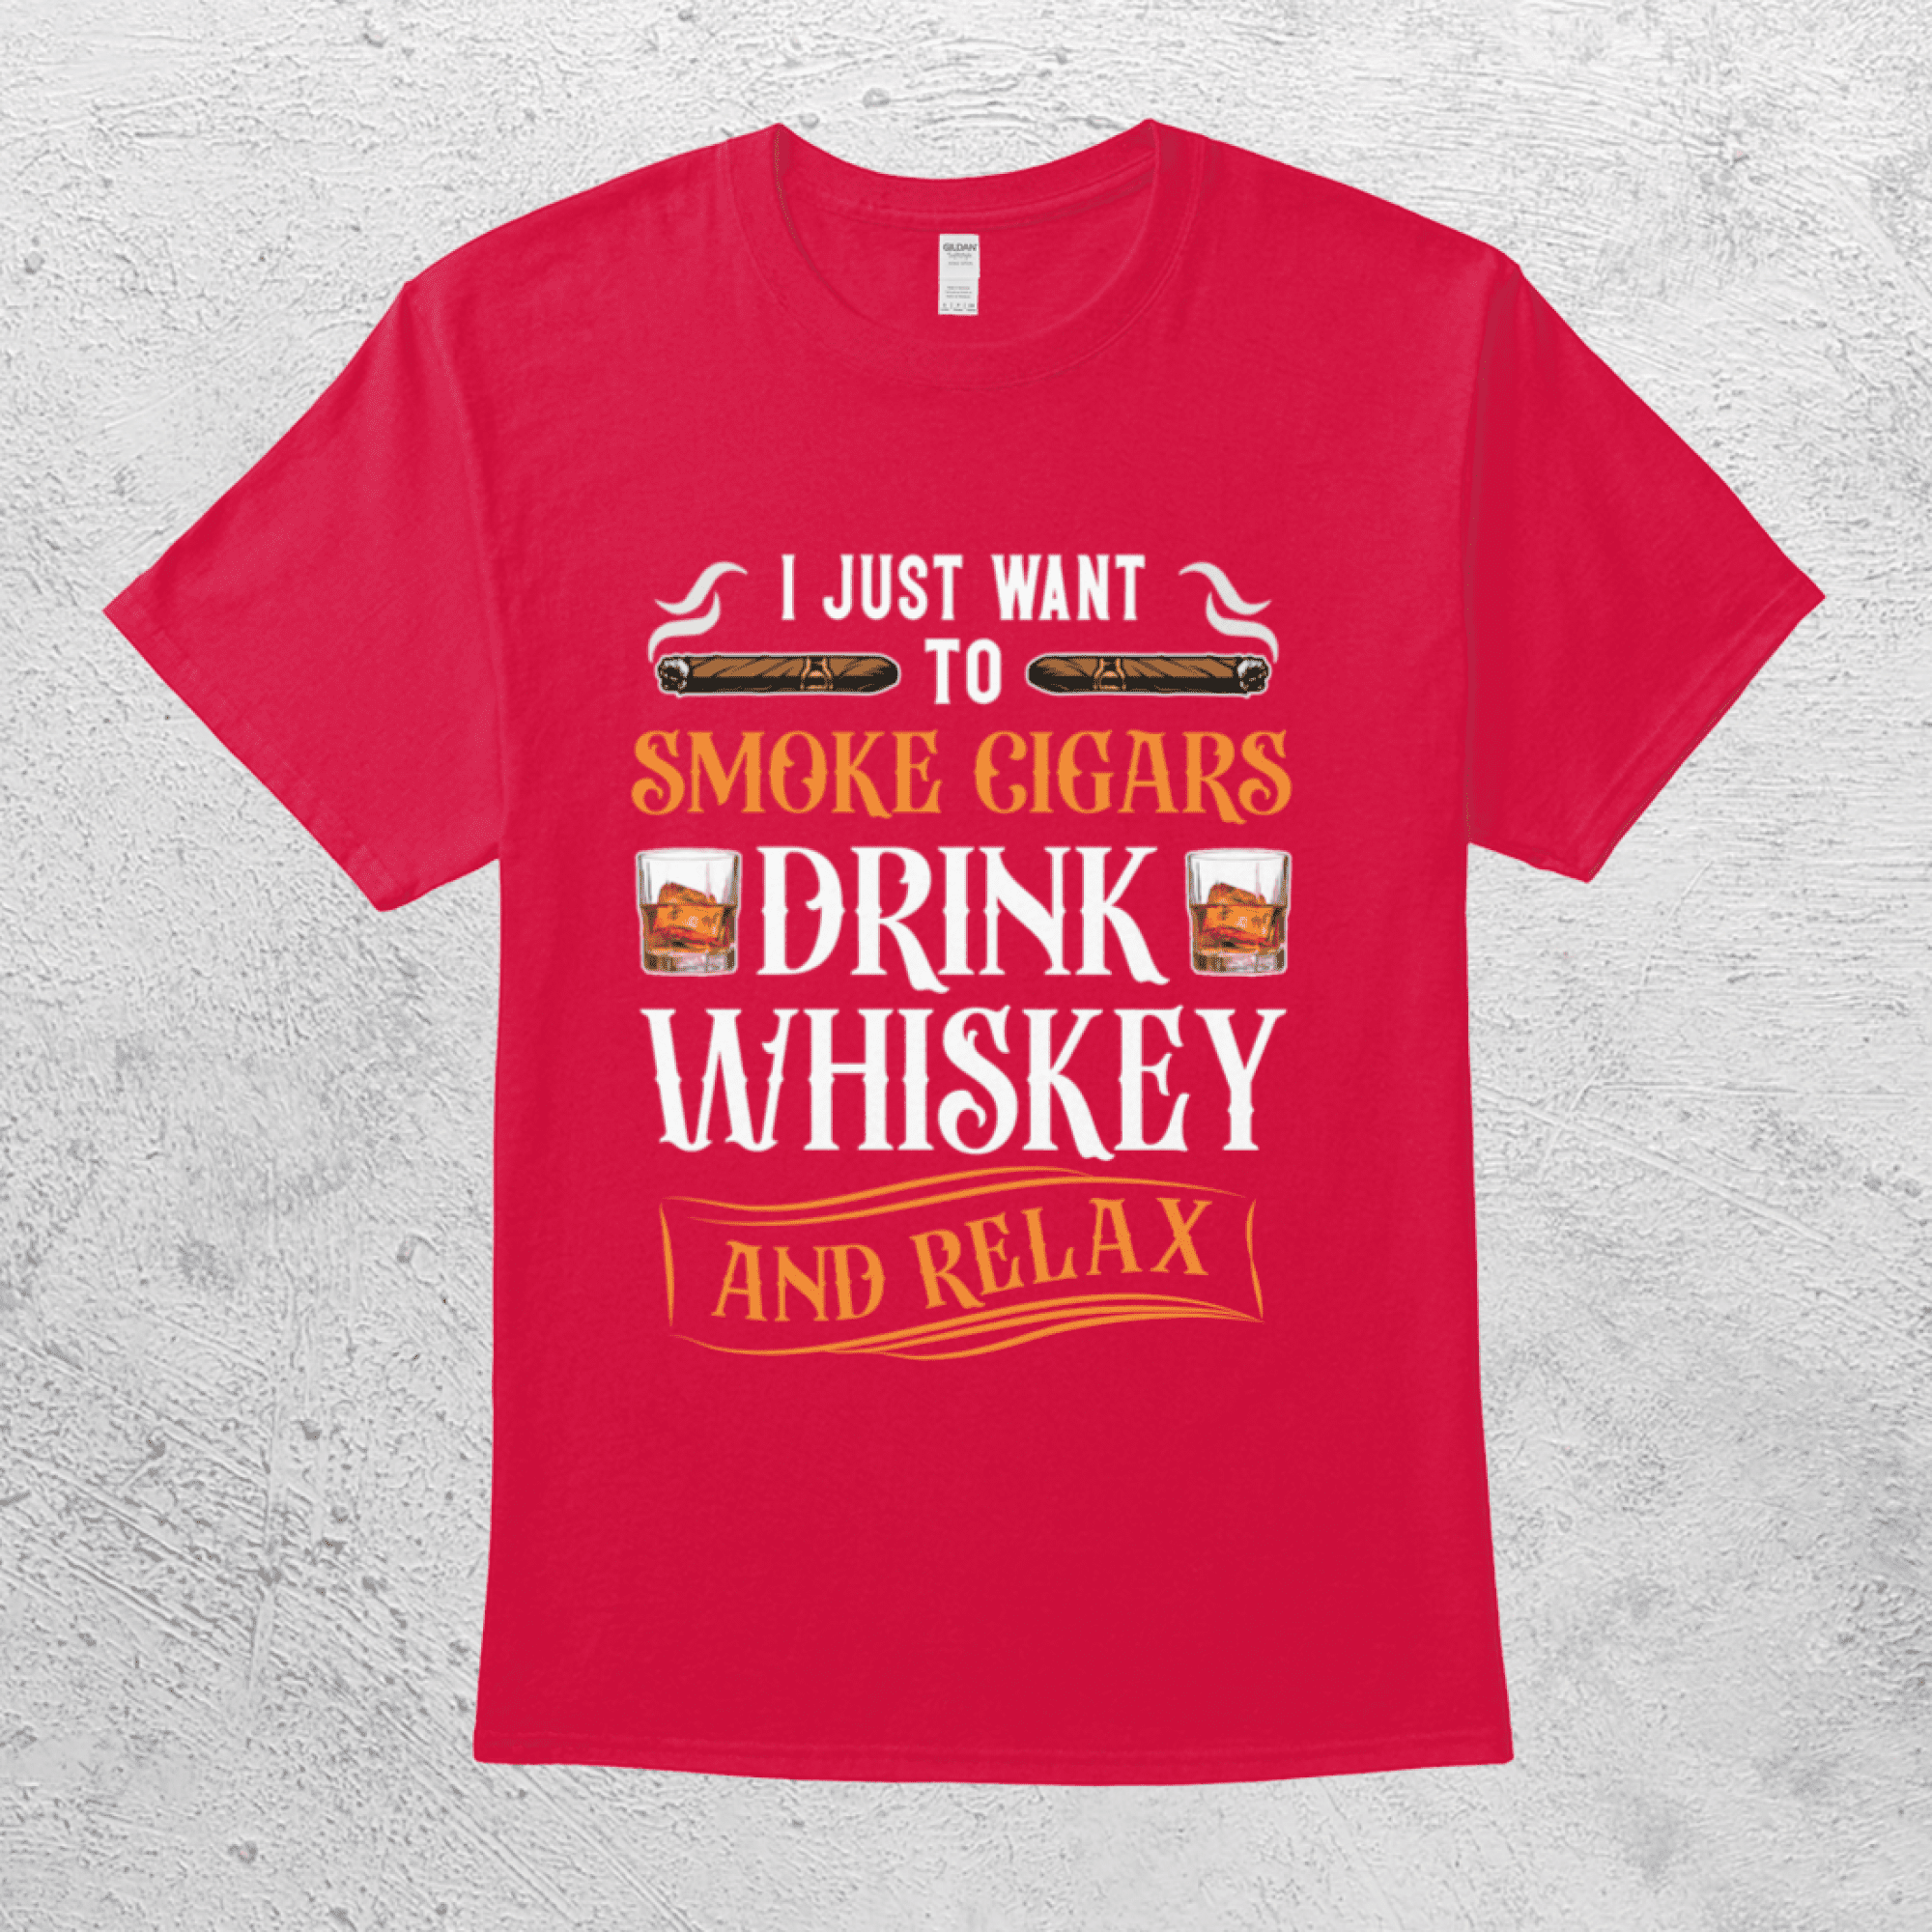 I Just Want To Smoke Cigars Drink Whiskey And Relax Drinking Shirt 